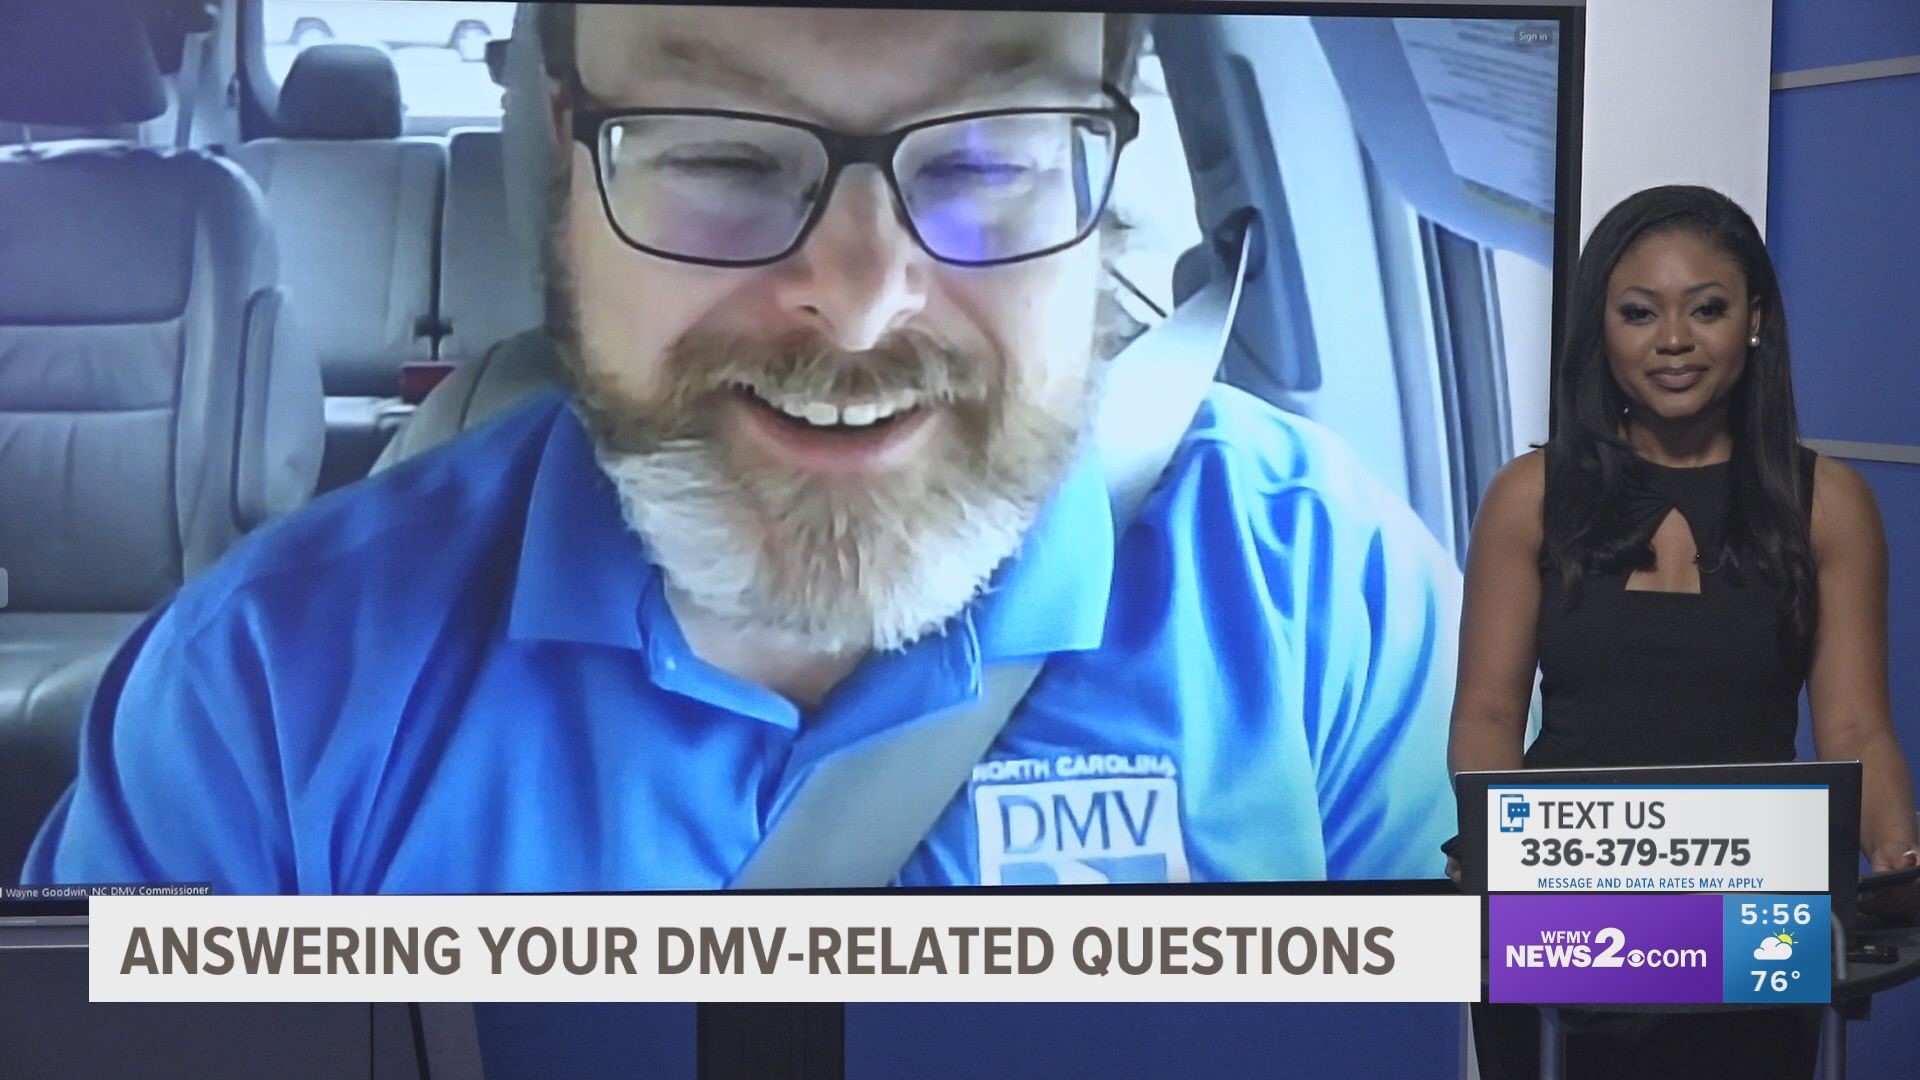 The NC DMV is working to improve wait times and customer experience with new process changes.